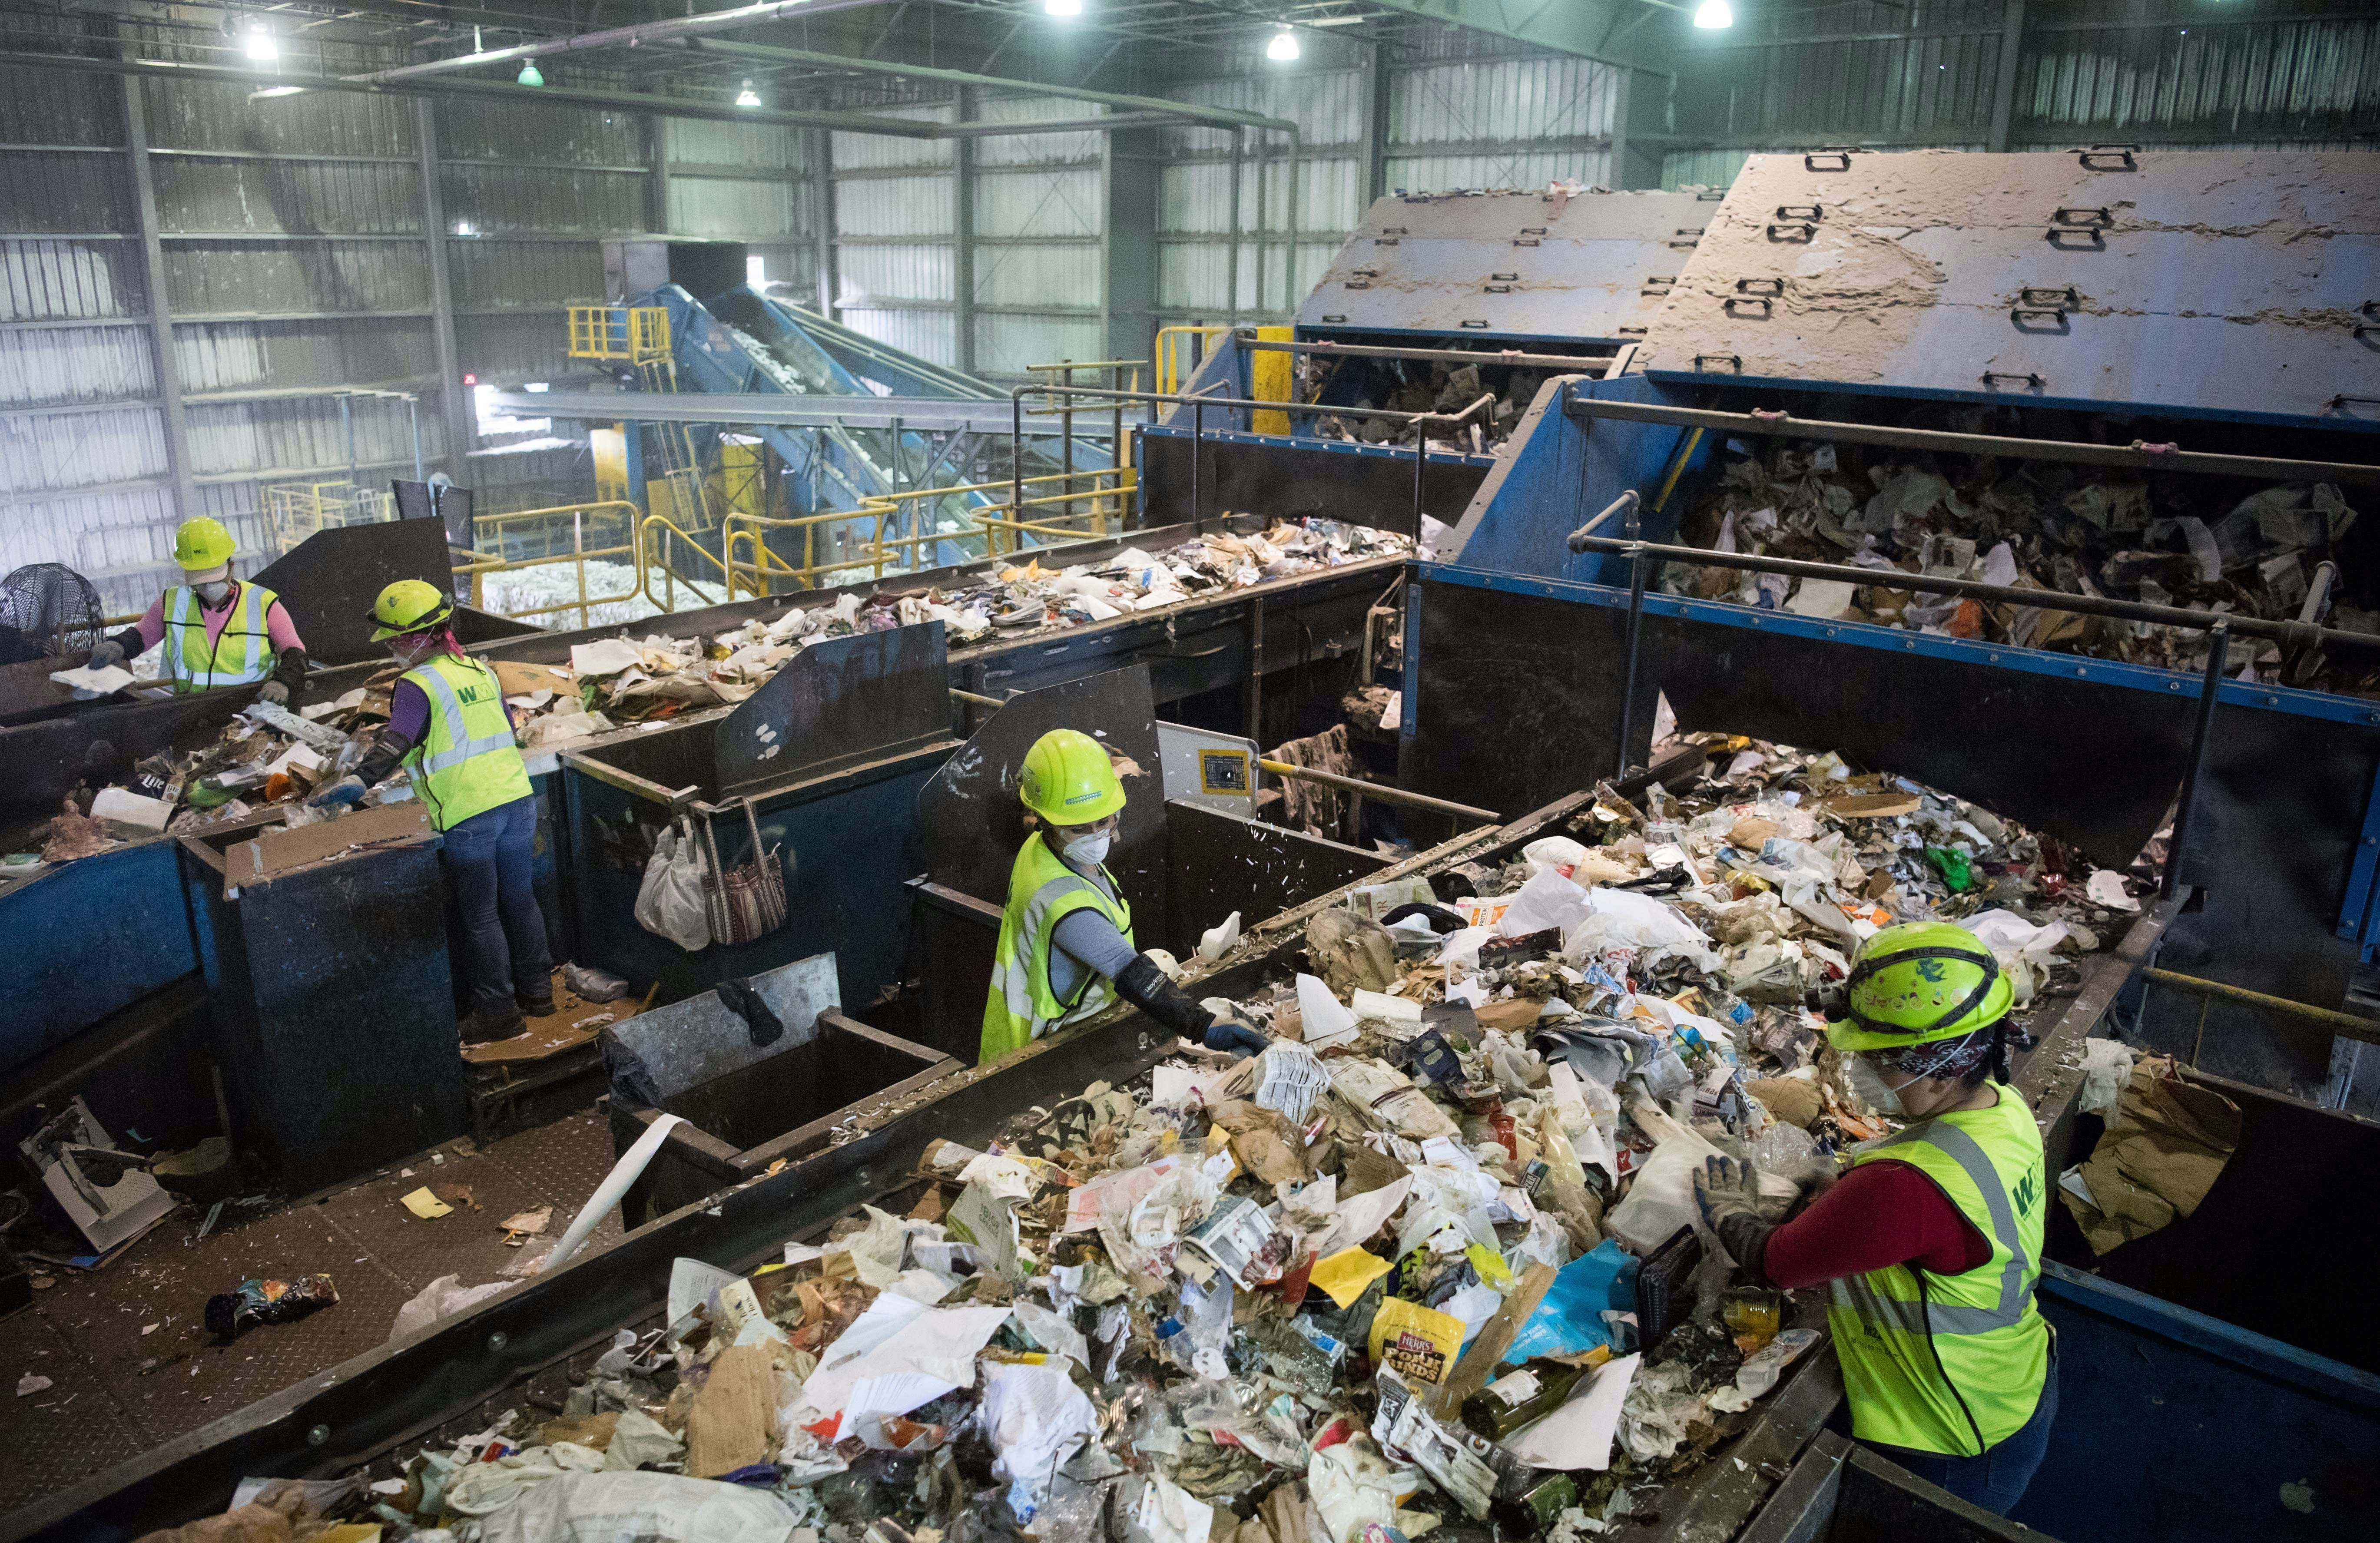 Workers sort recycling material at the Waste Management Material Recovery Facility in Elkridge, Maryland, June 28, 2018. - Some 900 tons of trash are dumped at all hours of the day and night, five days a week, on the conveyor belts at the plant. For months, this major recycling facility for the greater Baltimore-Washington area has been facing a big problem: it has to pay to get rid of huge amounts of paper and plastic it would normally sell to China. But Beijing is no longer buying, claiming the recycled materials are "contaminated."